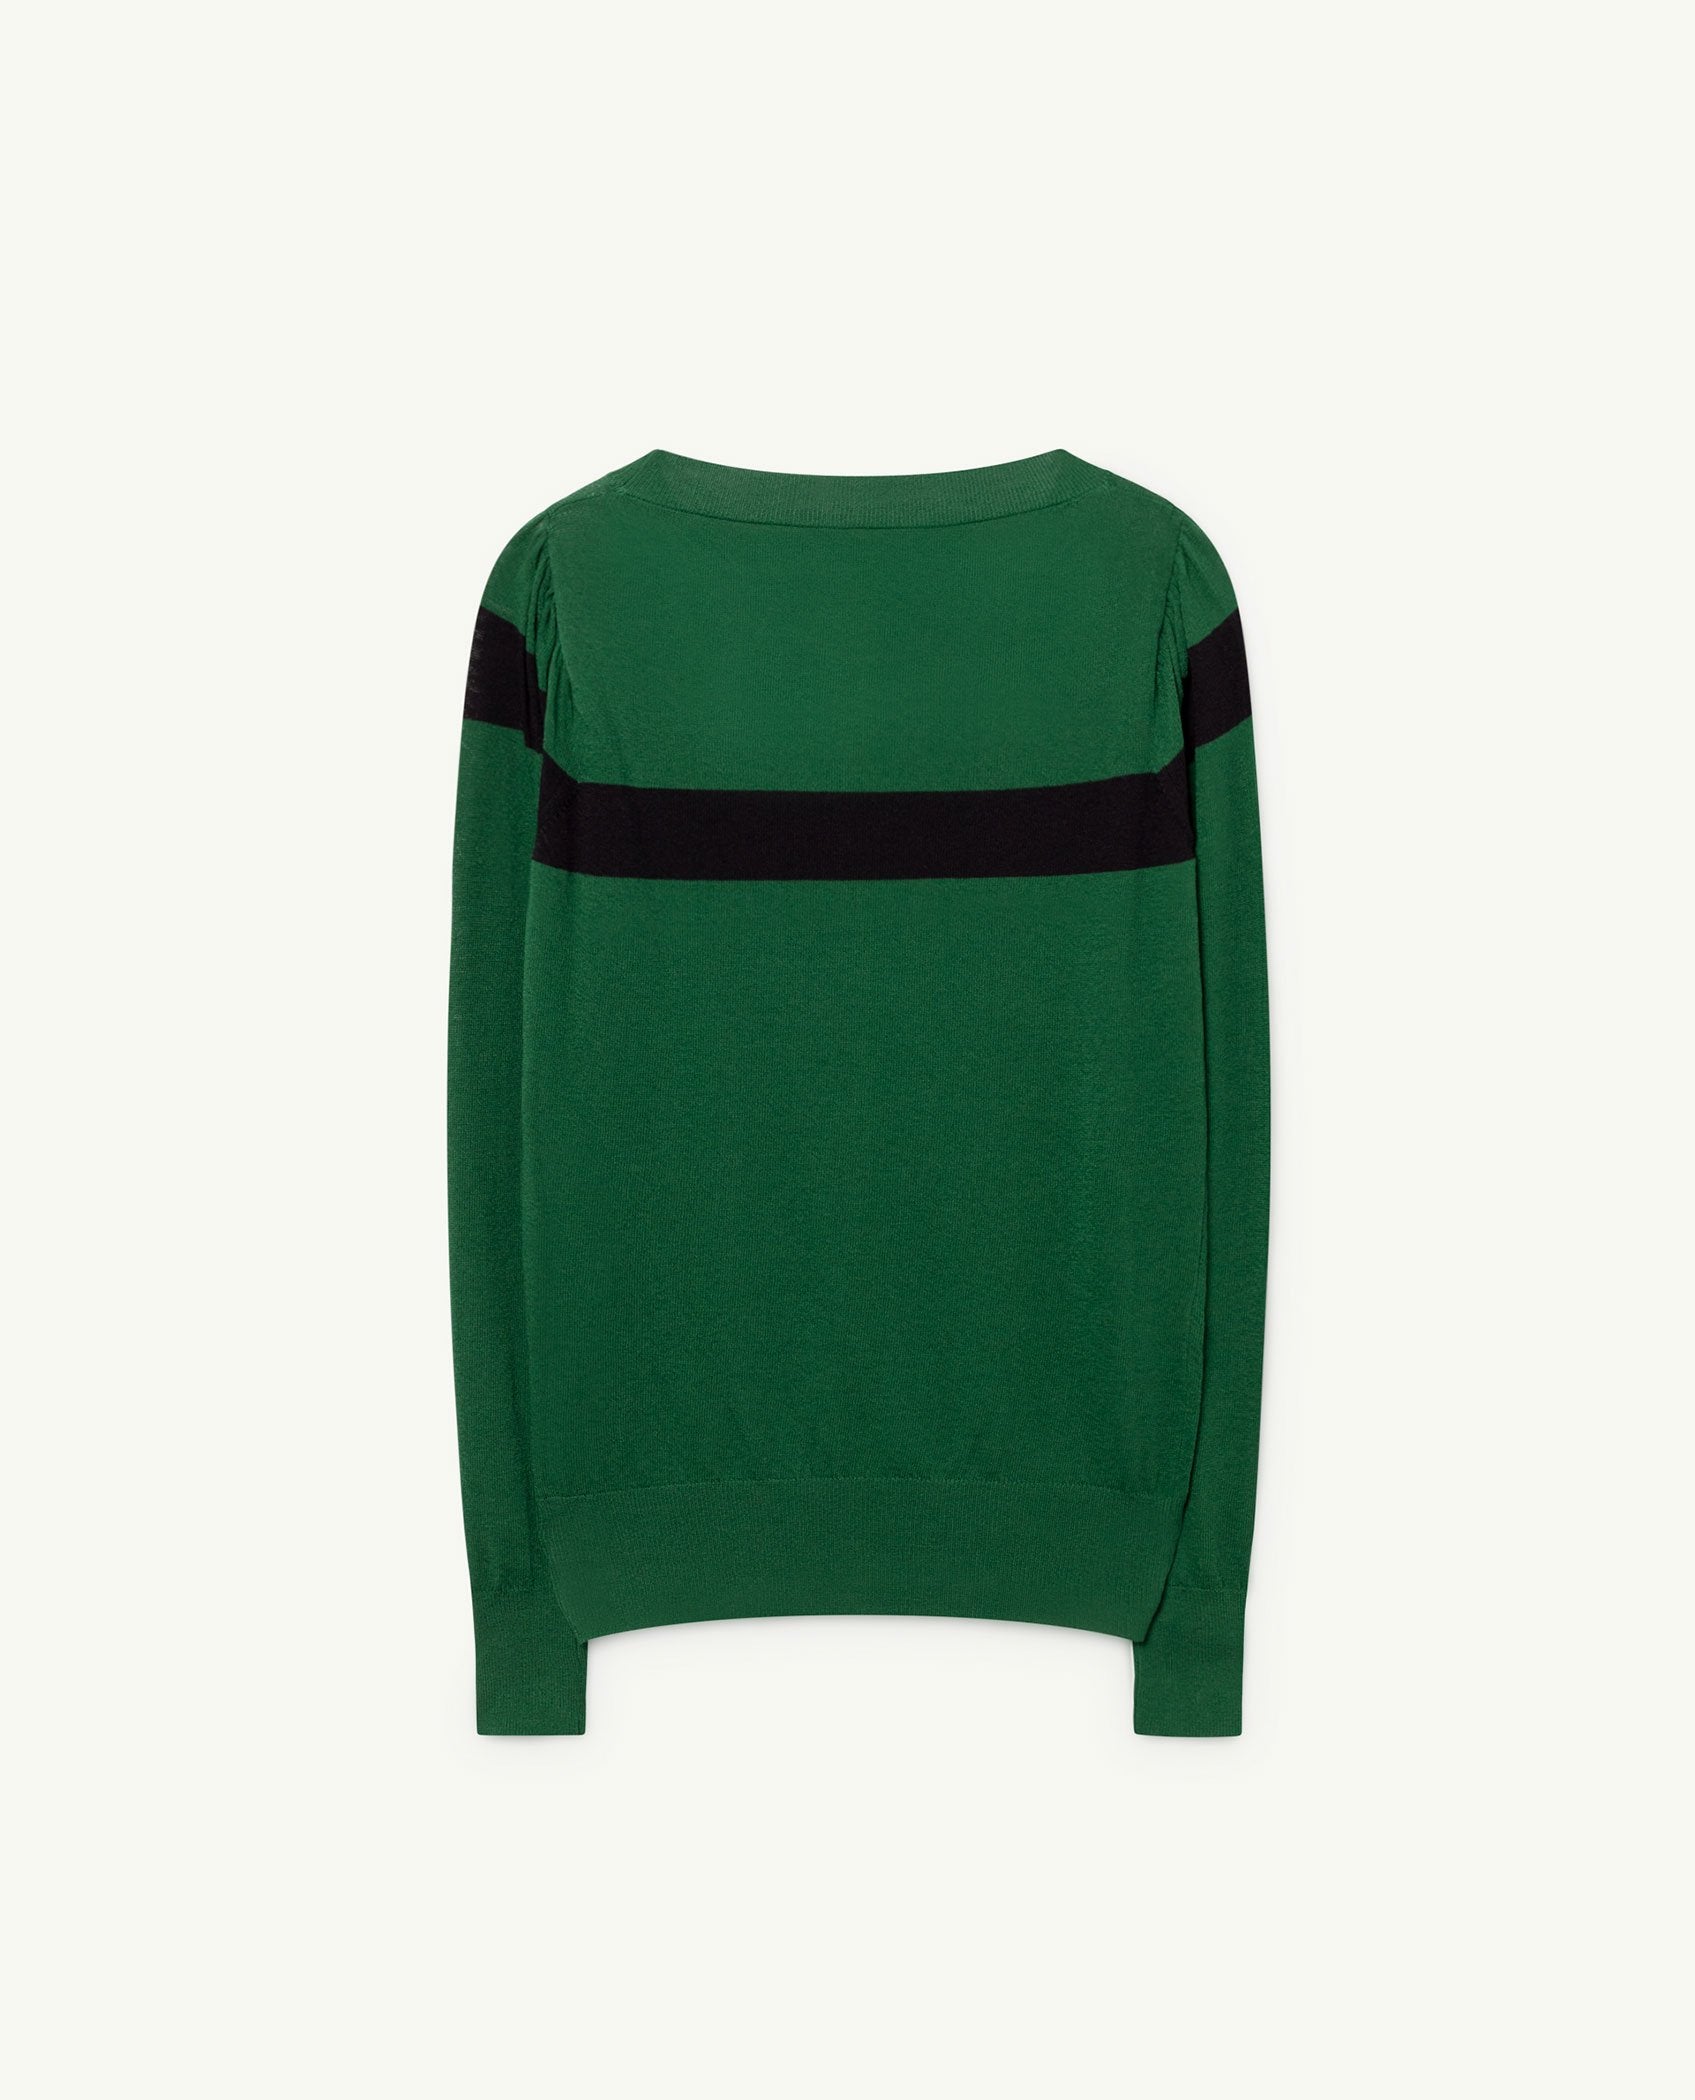 Green Condor Sweater PRODUCT BACK